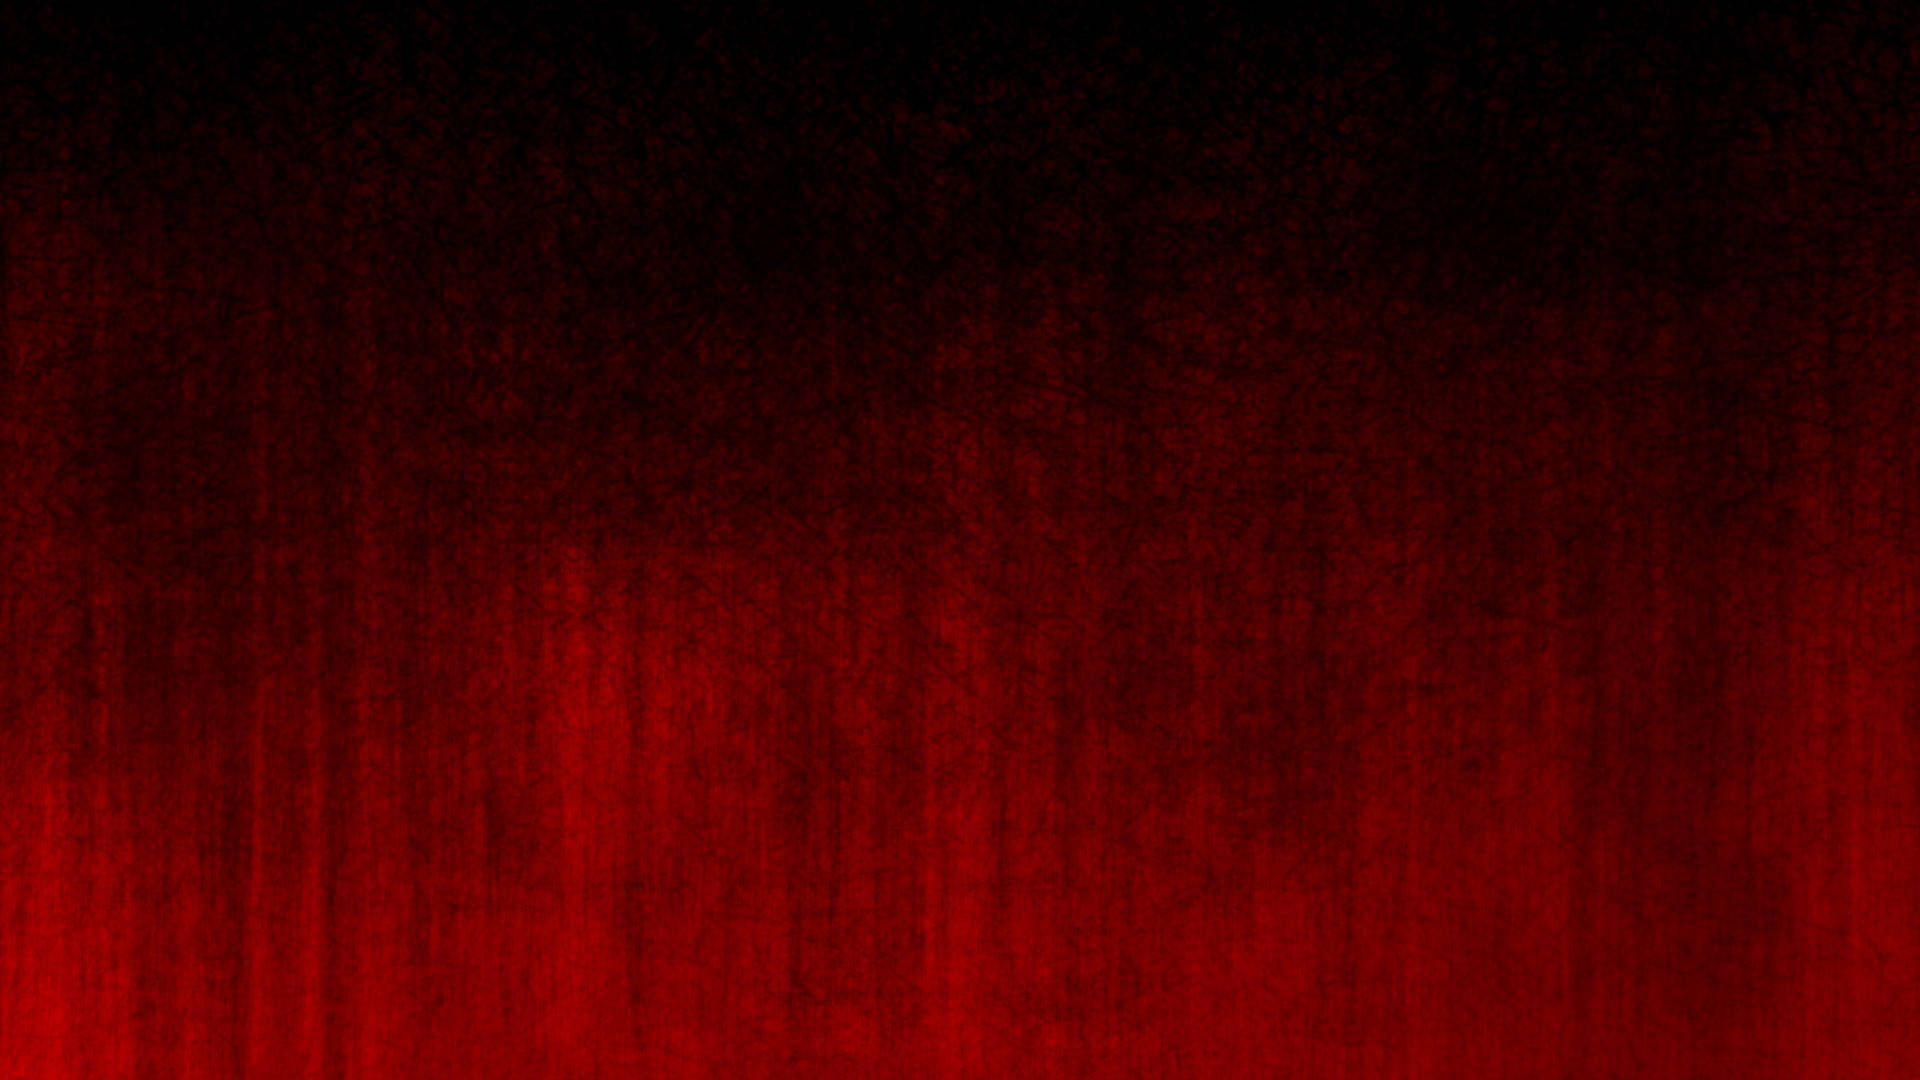 Red And Black Gradient Grunge Texture Wallpaper